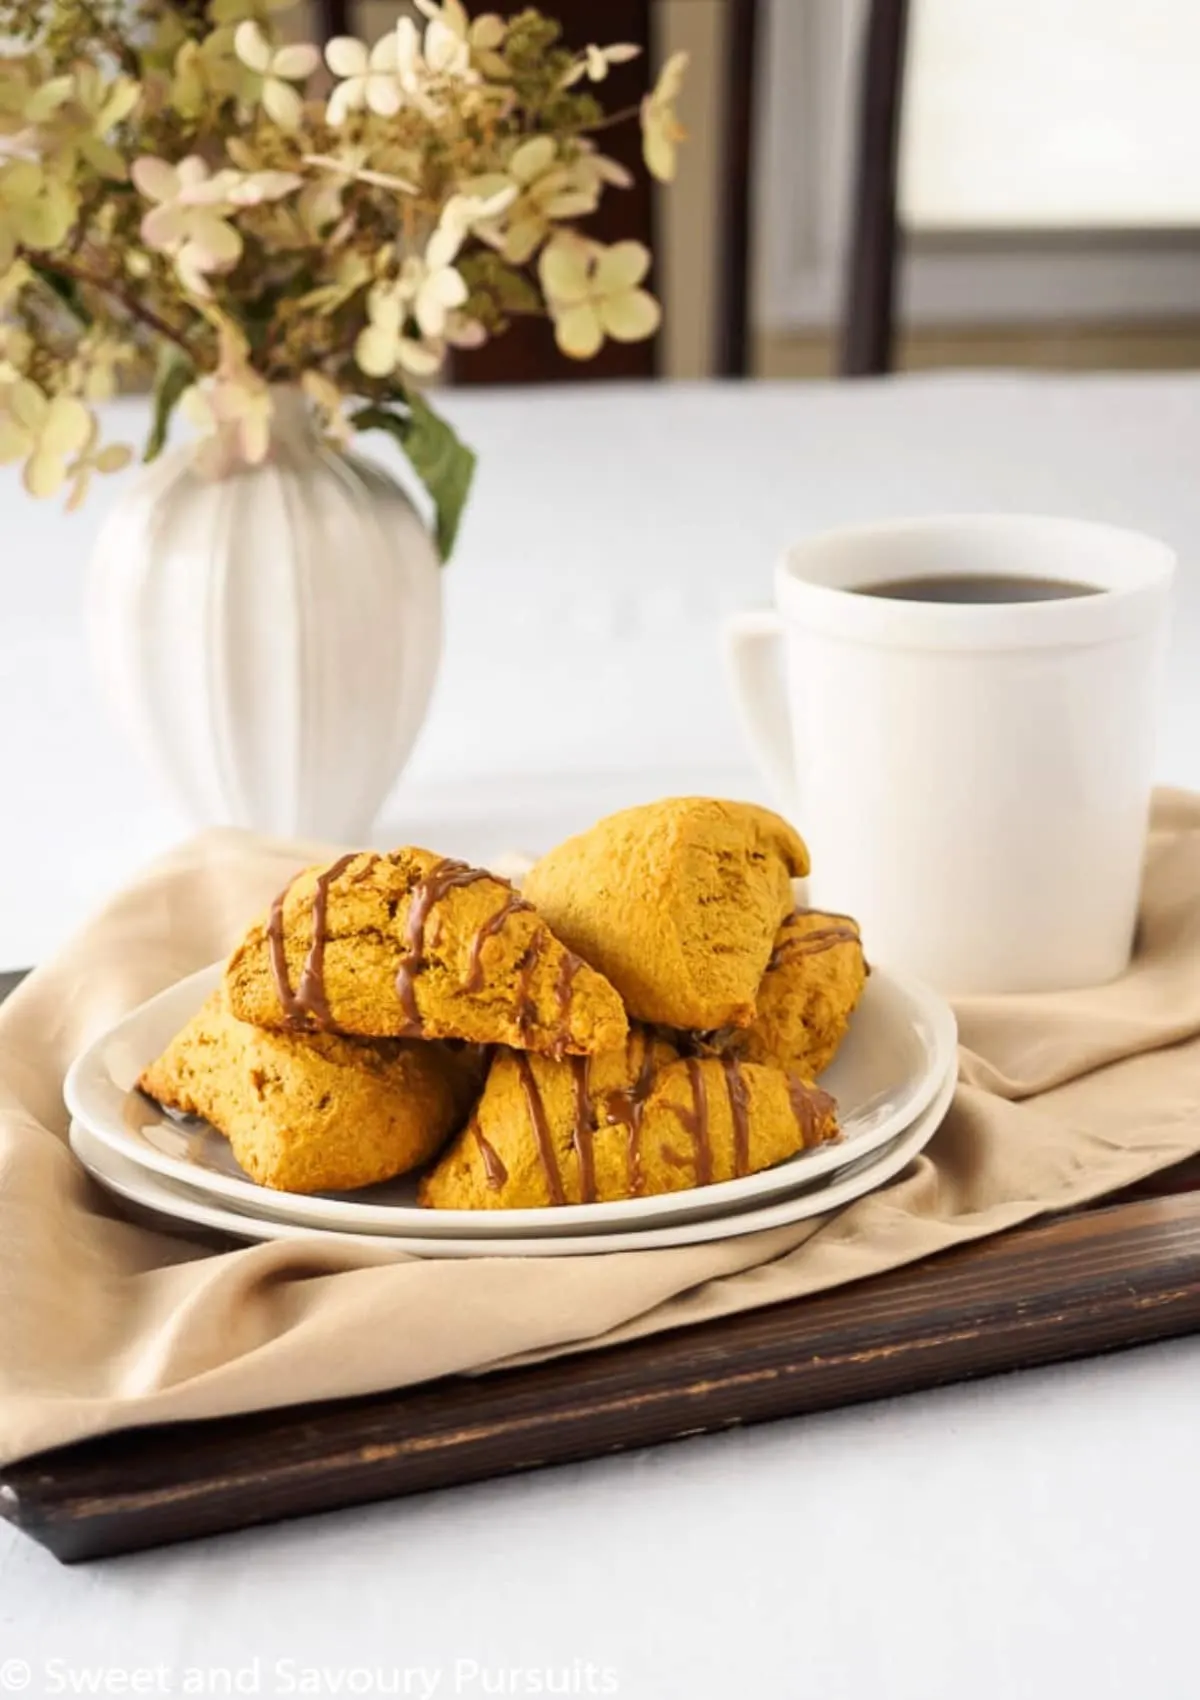 Dish of pumpkin scones served with a cup of coffee.